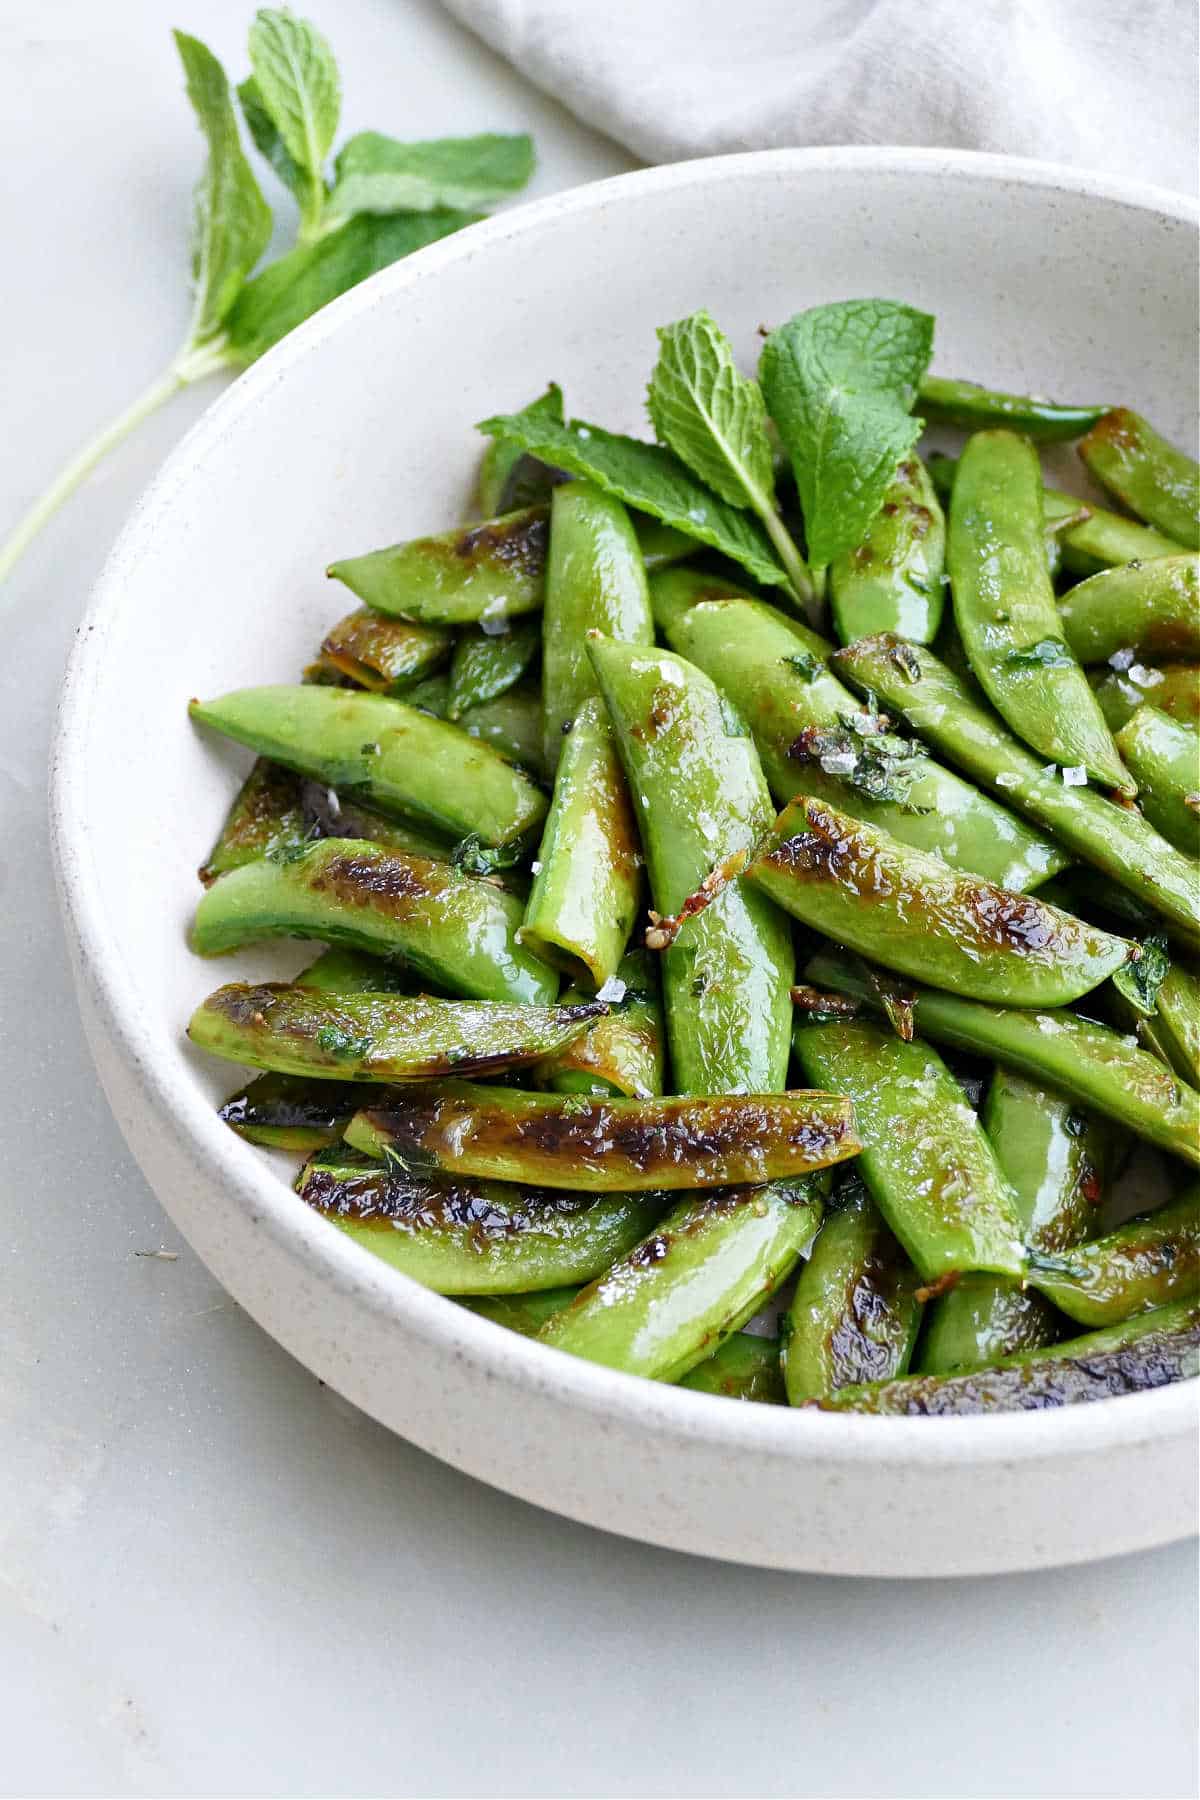 Sauteed snap peas in a white serving bowl.